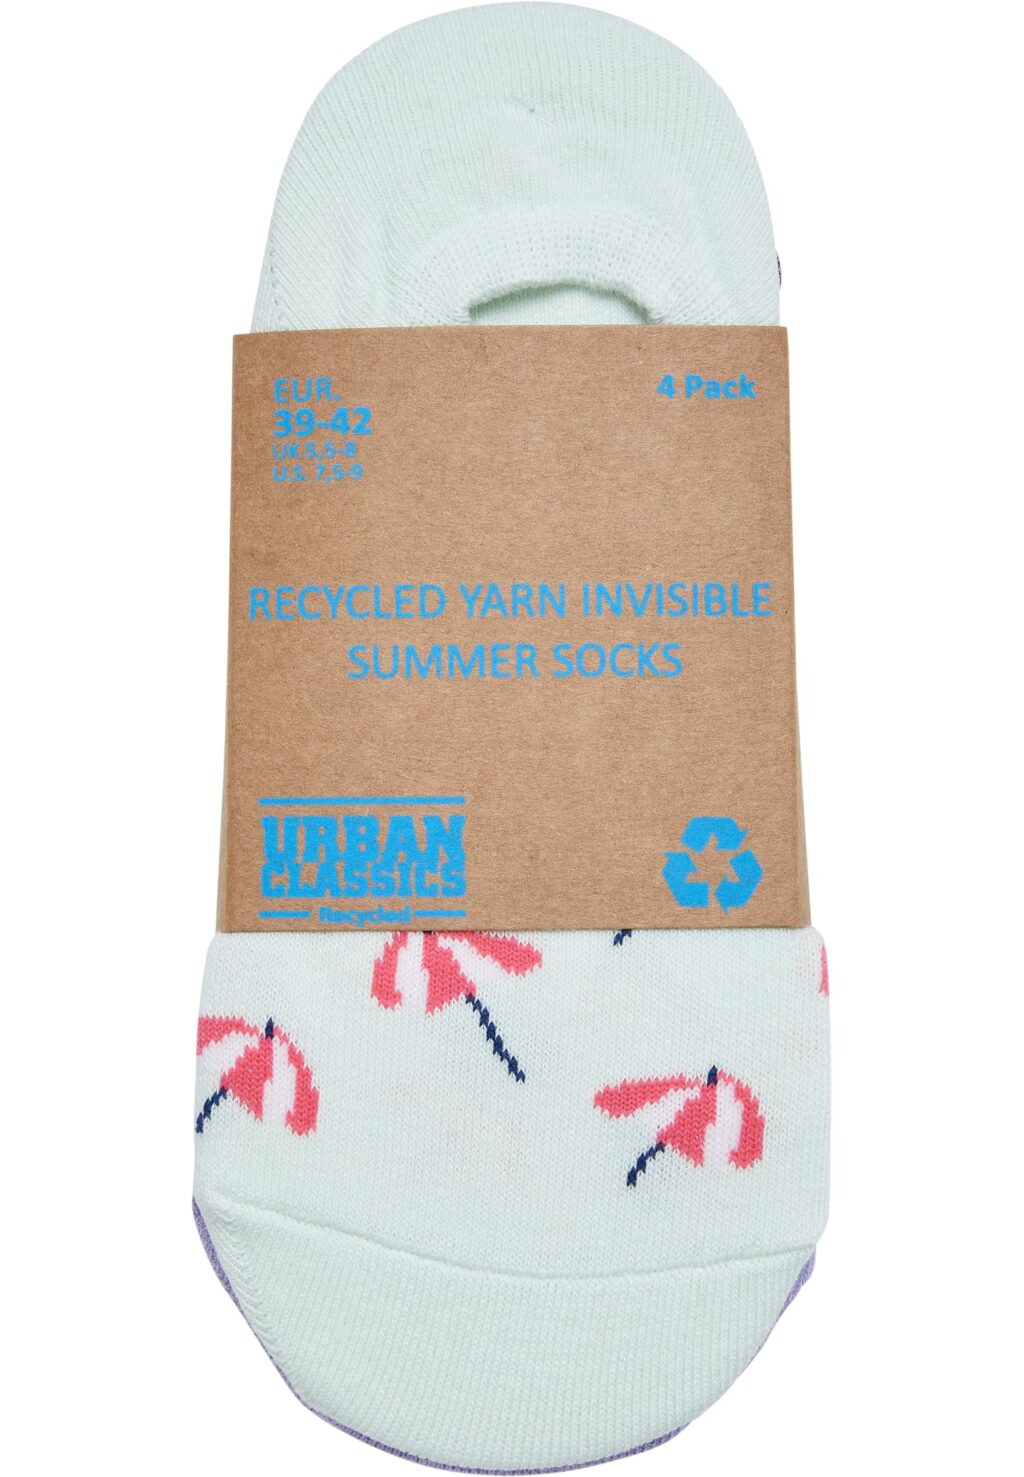 Recycled Yarn Invisible Summer Socks 4-Pack multicolor TB5179